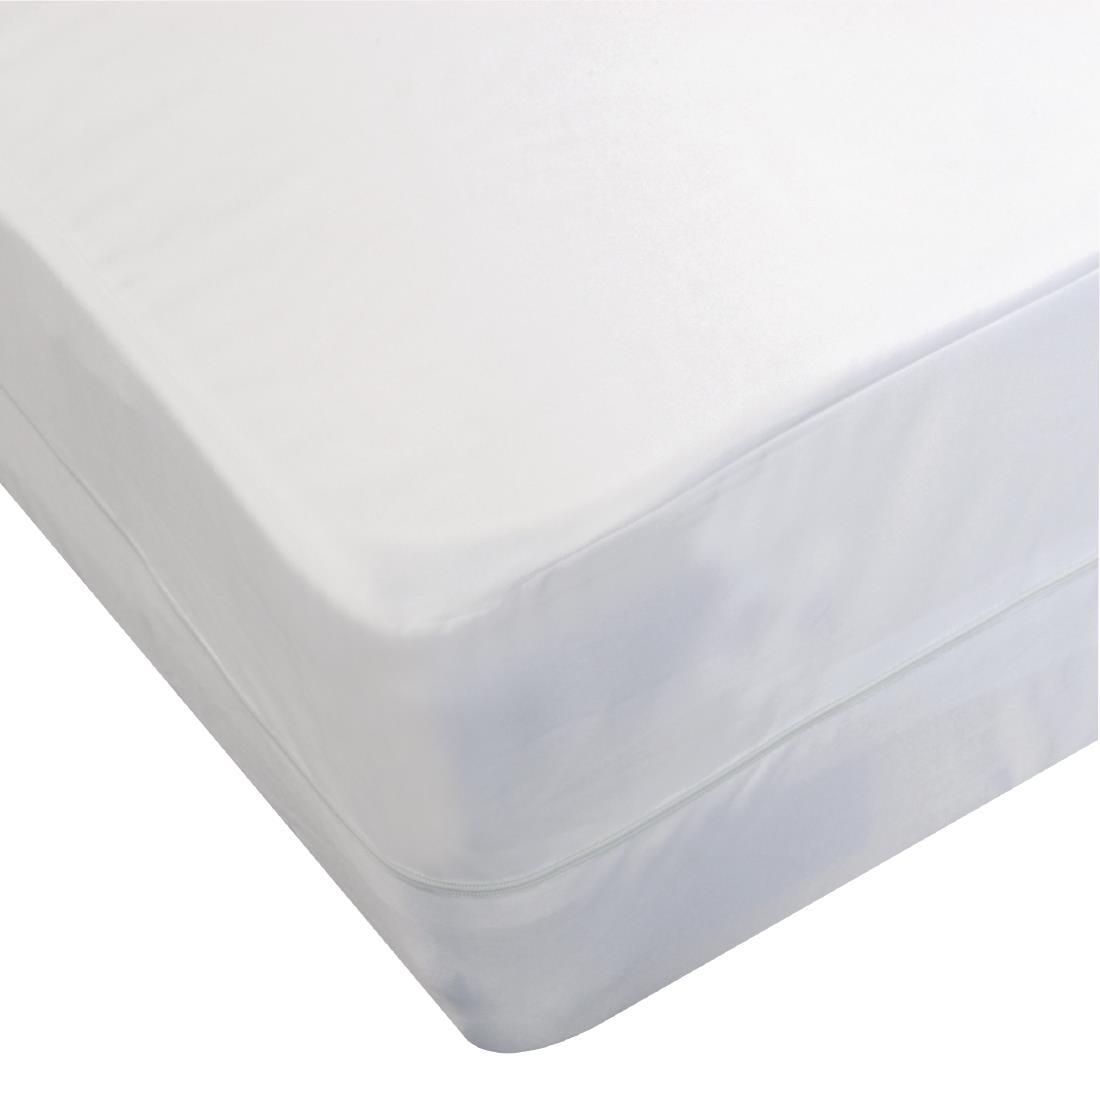 Protect-A-Bed Allerzip Smooth Mattress Protector Special 200cm - HA514  - 2